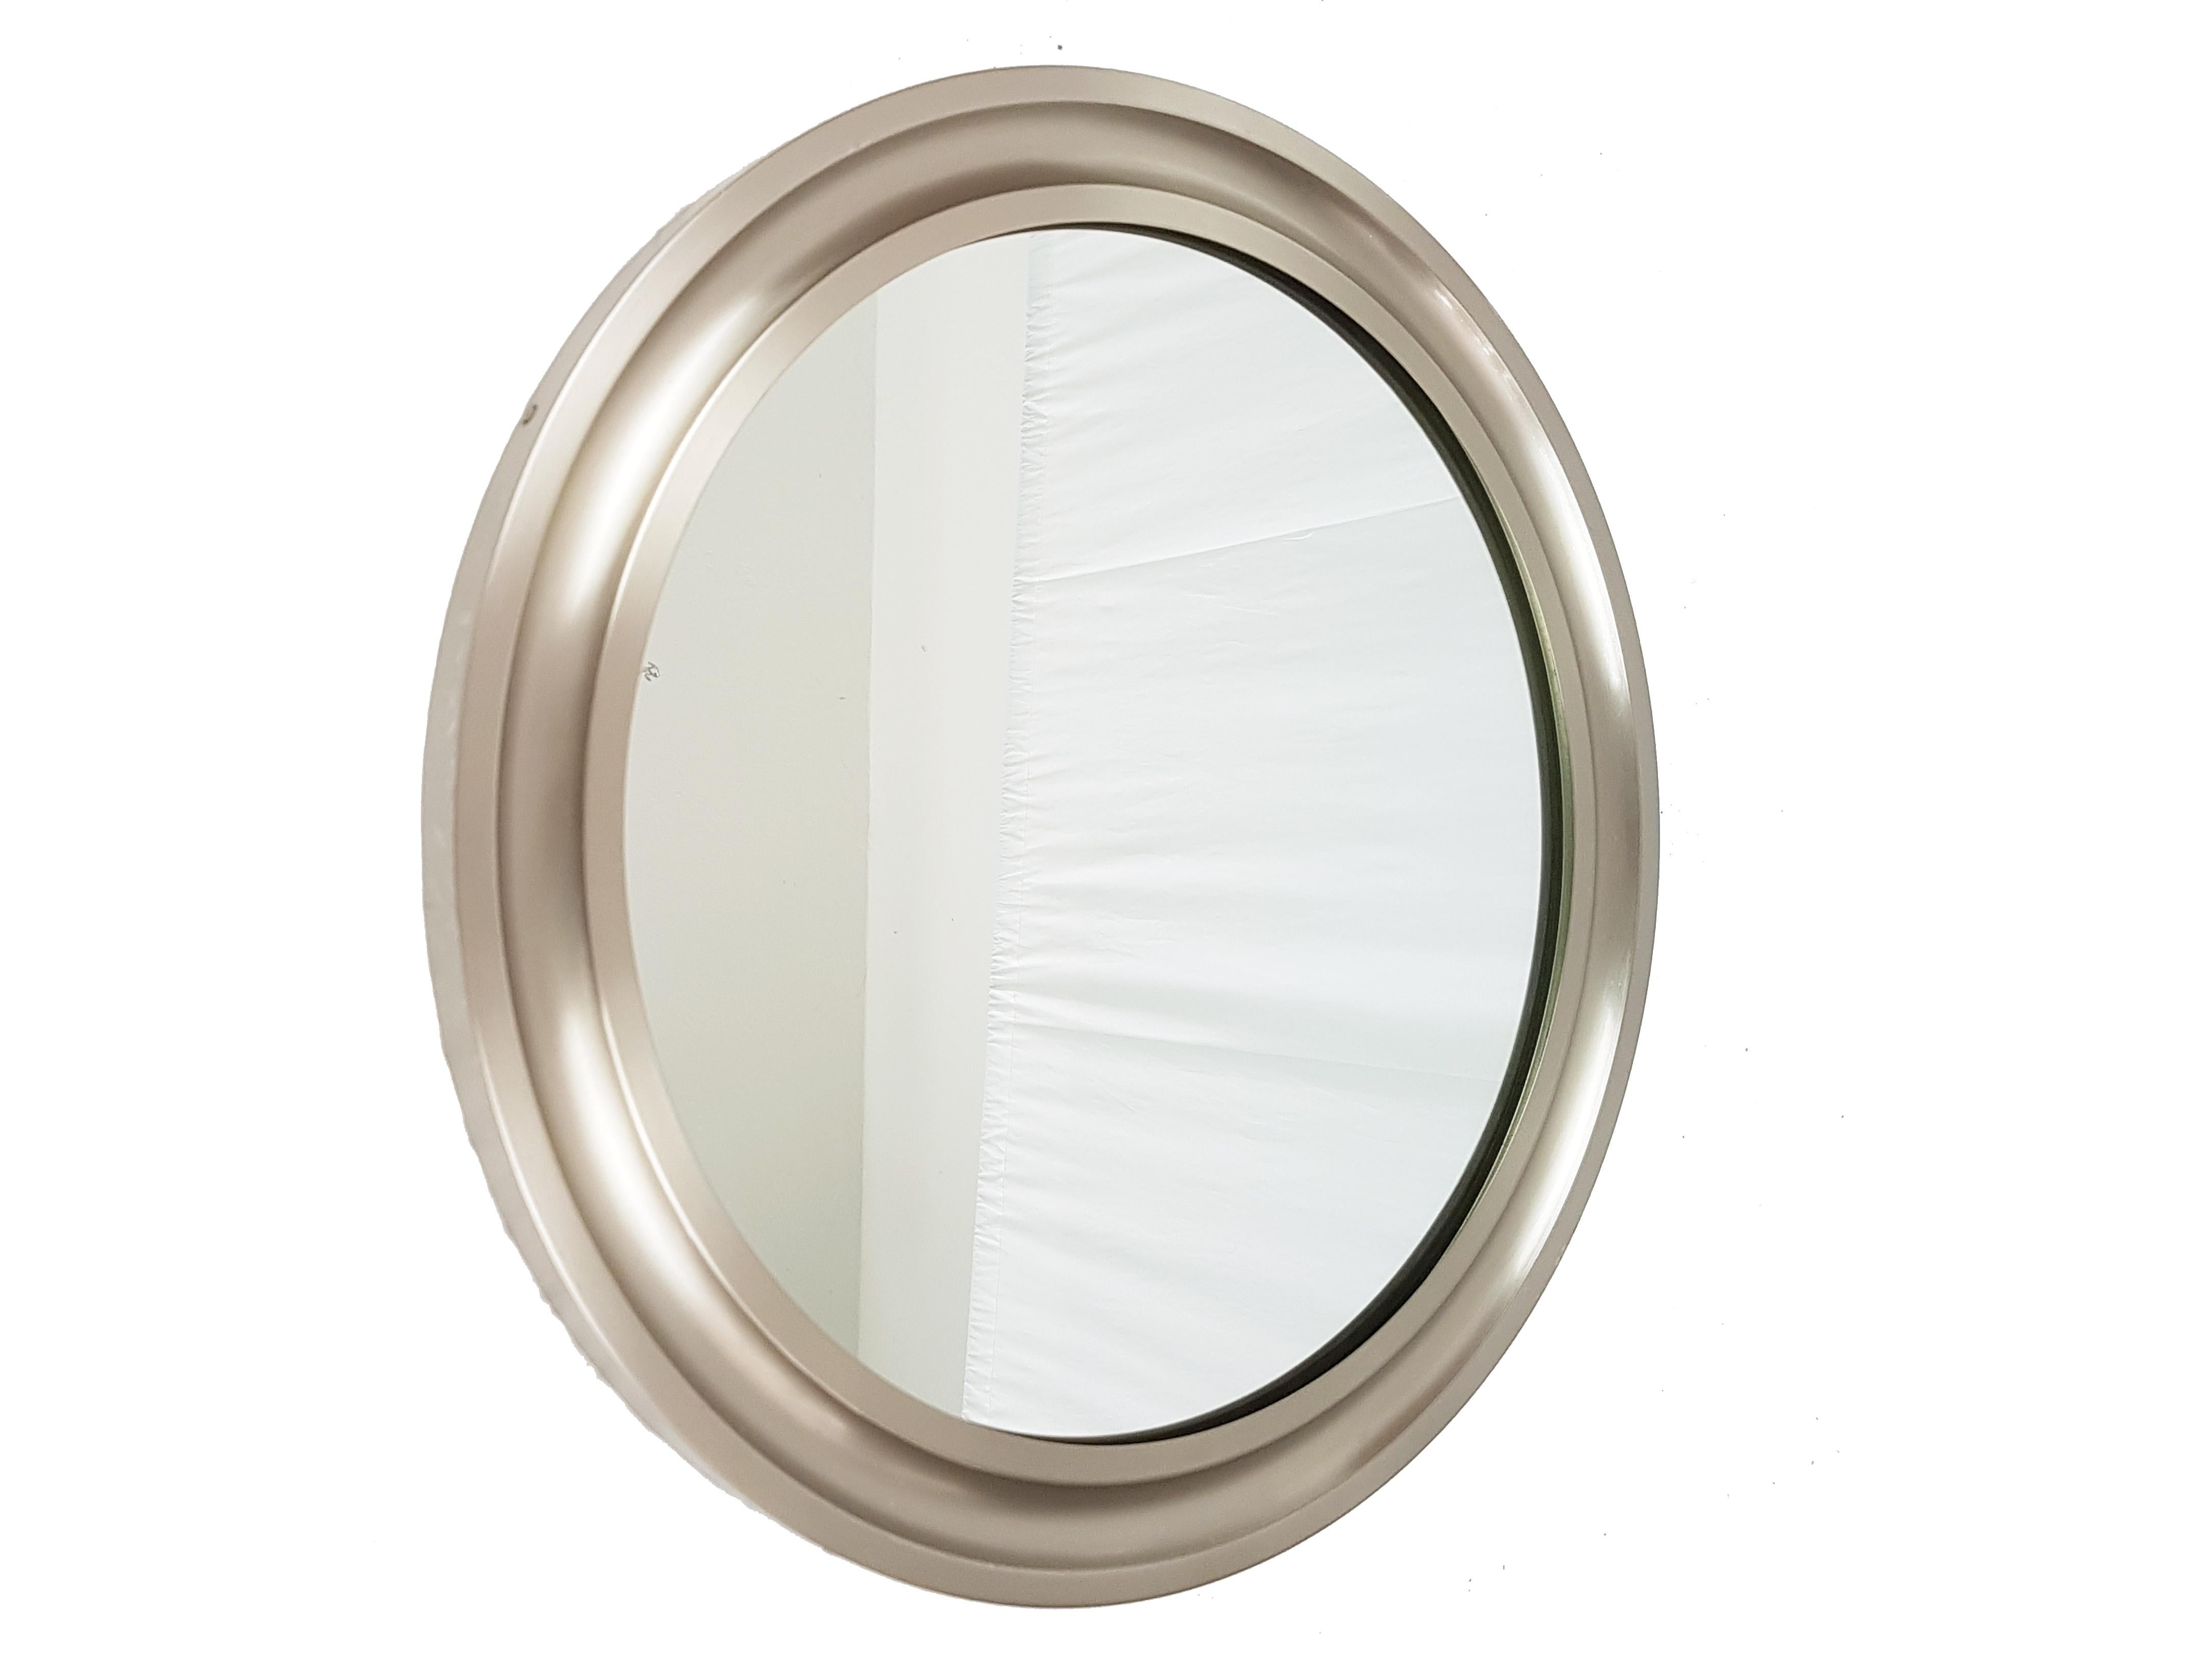 Italian Nickeled & Black Metal 1970s Round Wall Mirror Narcisso by S. Mazza for Artemide